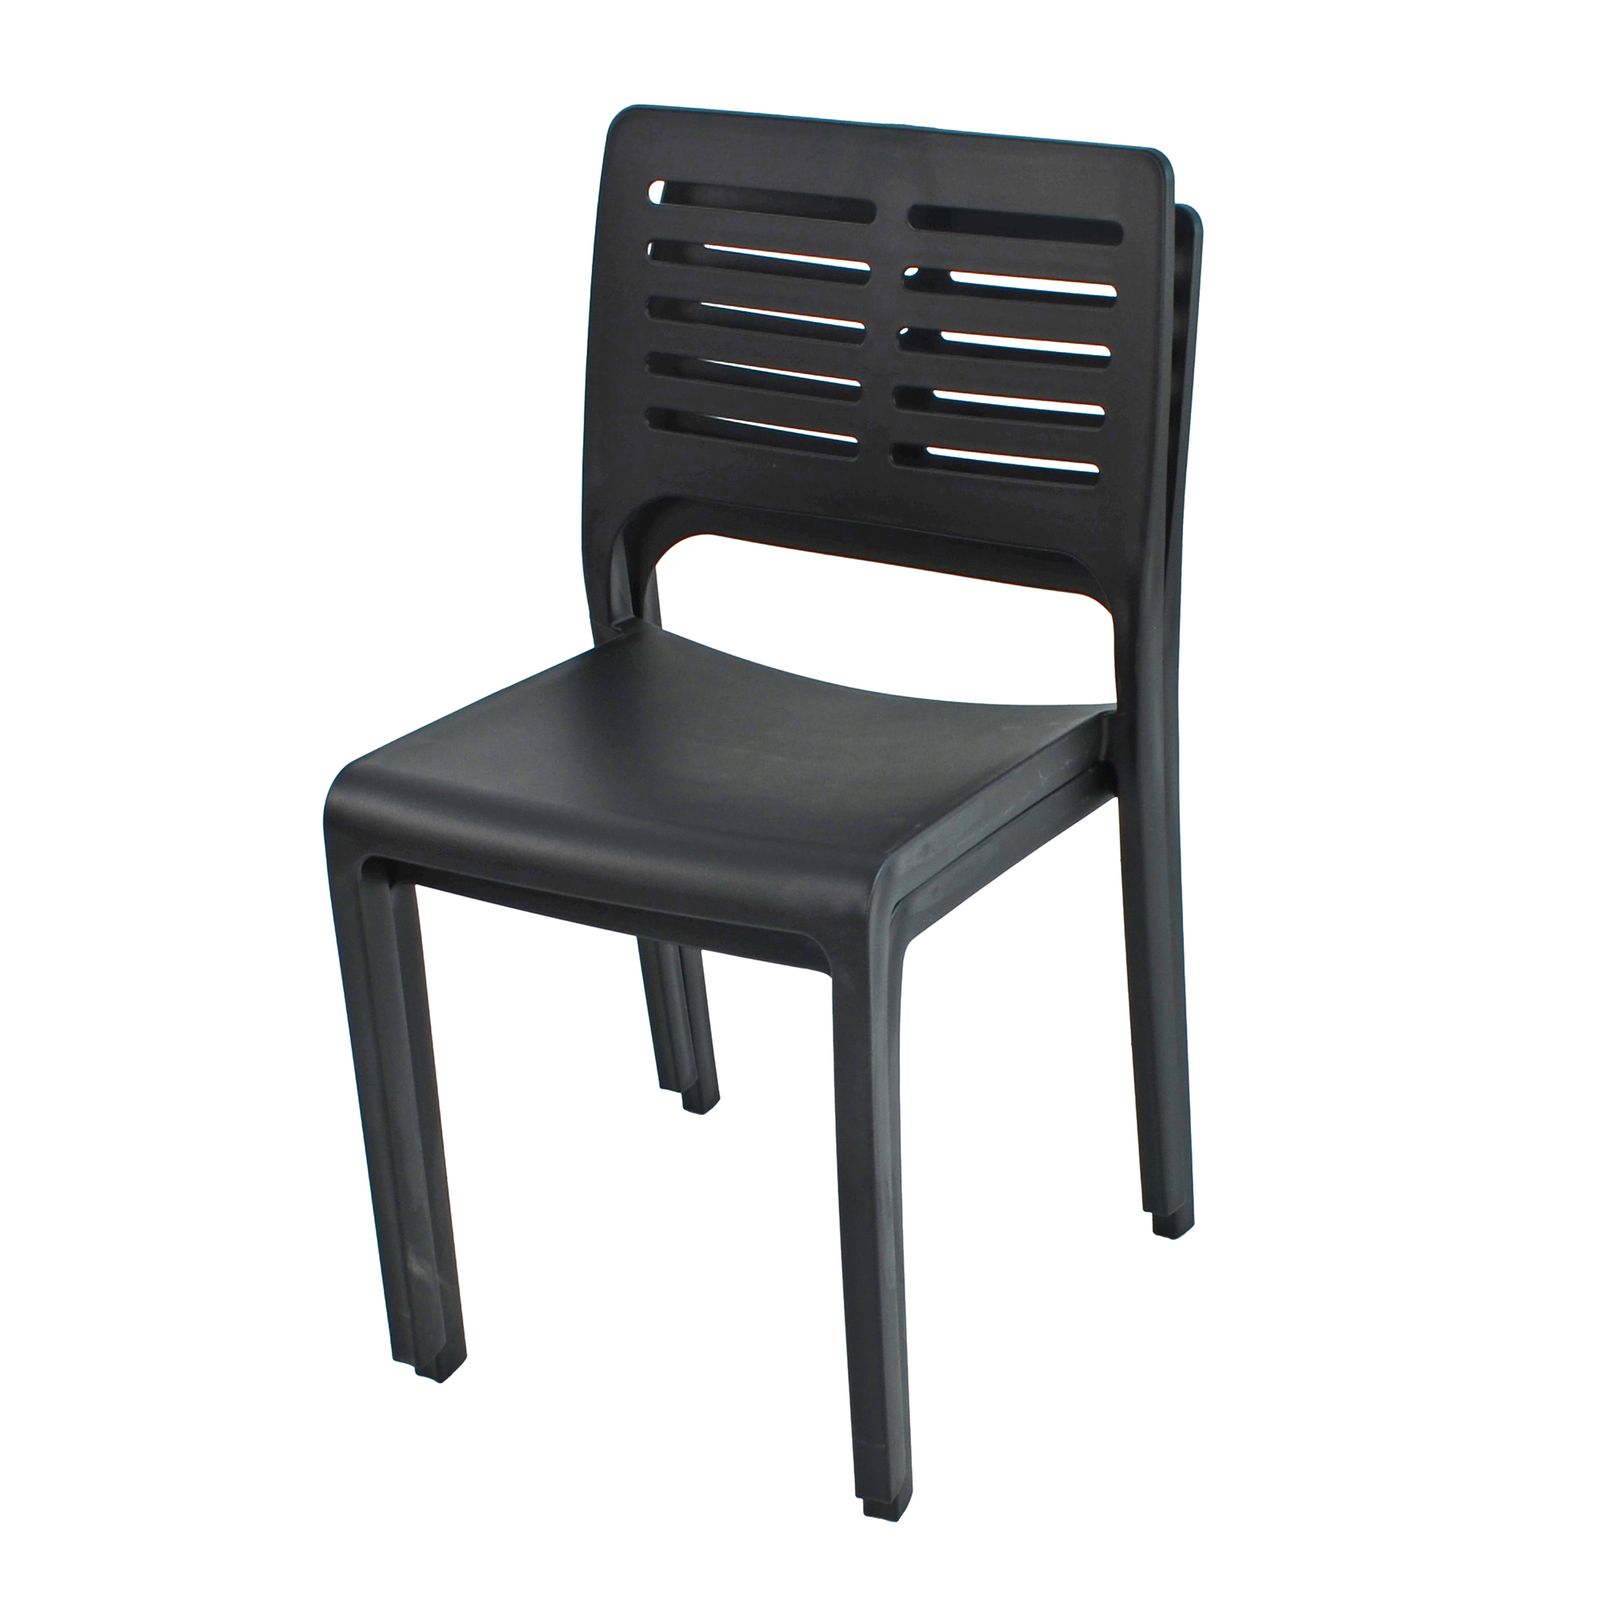 Trabella Mistral Chair in Anthracite (Pack of 2) Chairs Trabella Default Title  